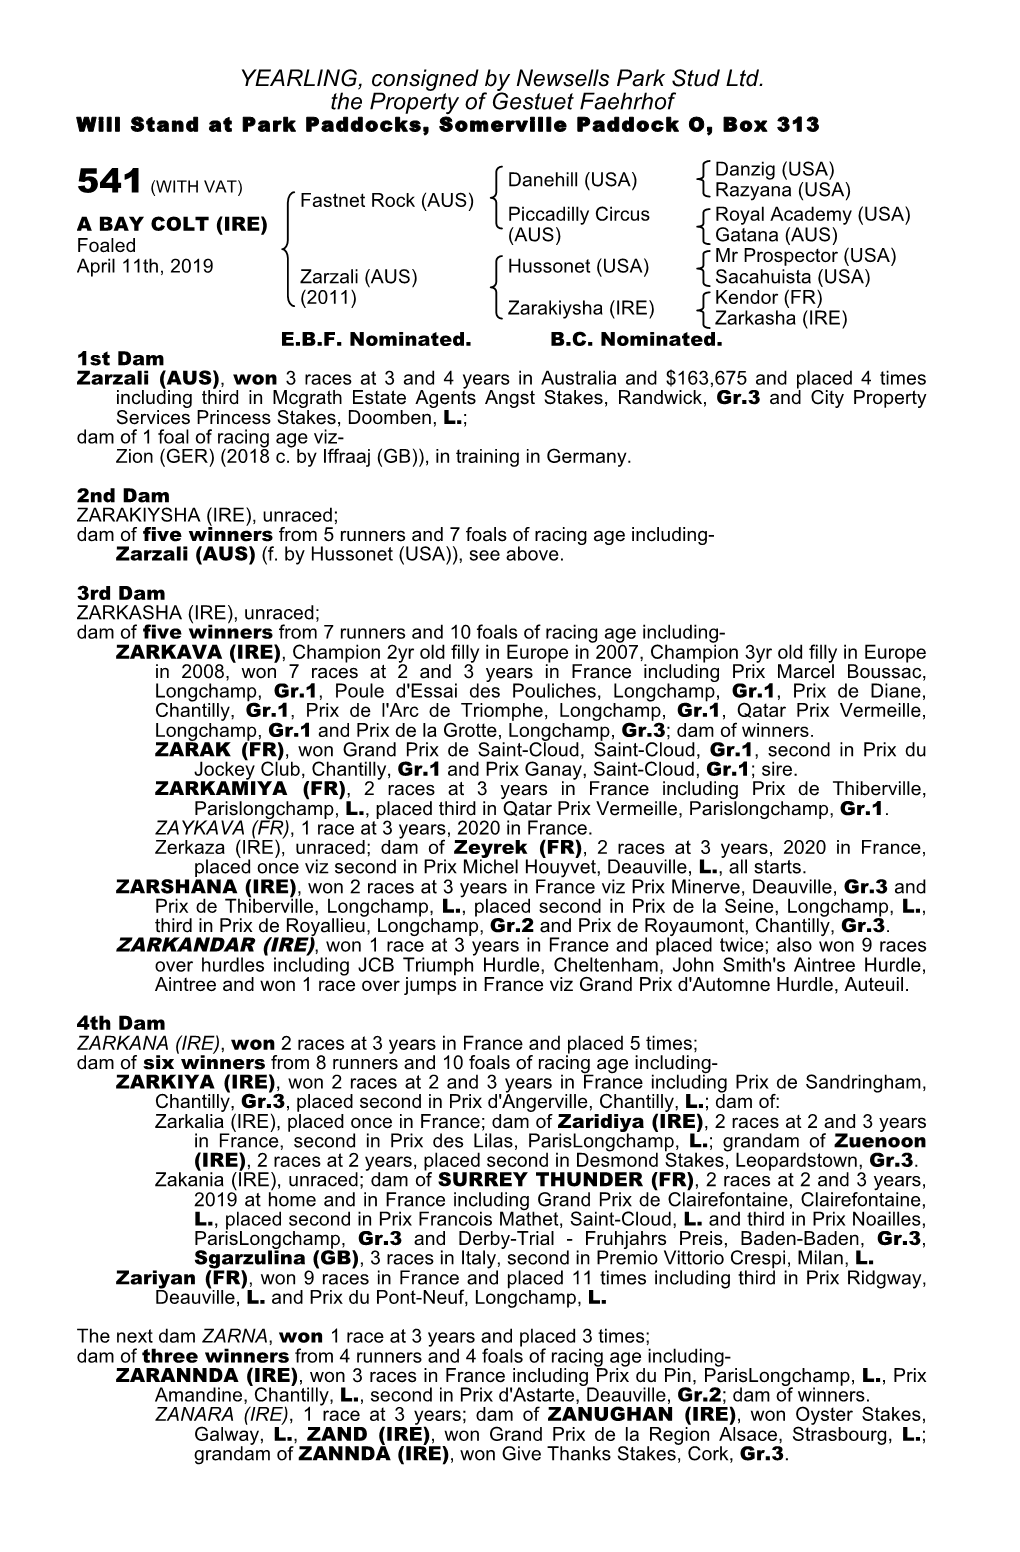 YEARLING, Consigned by Newsells Park Stud Ltd. the Property of Gestuet Faehrhof Will Stand at Park Paddocks, Somerville Paddock O, Box 313